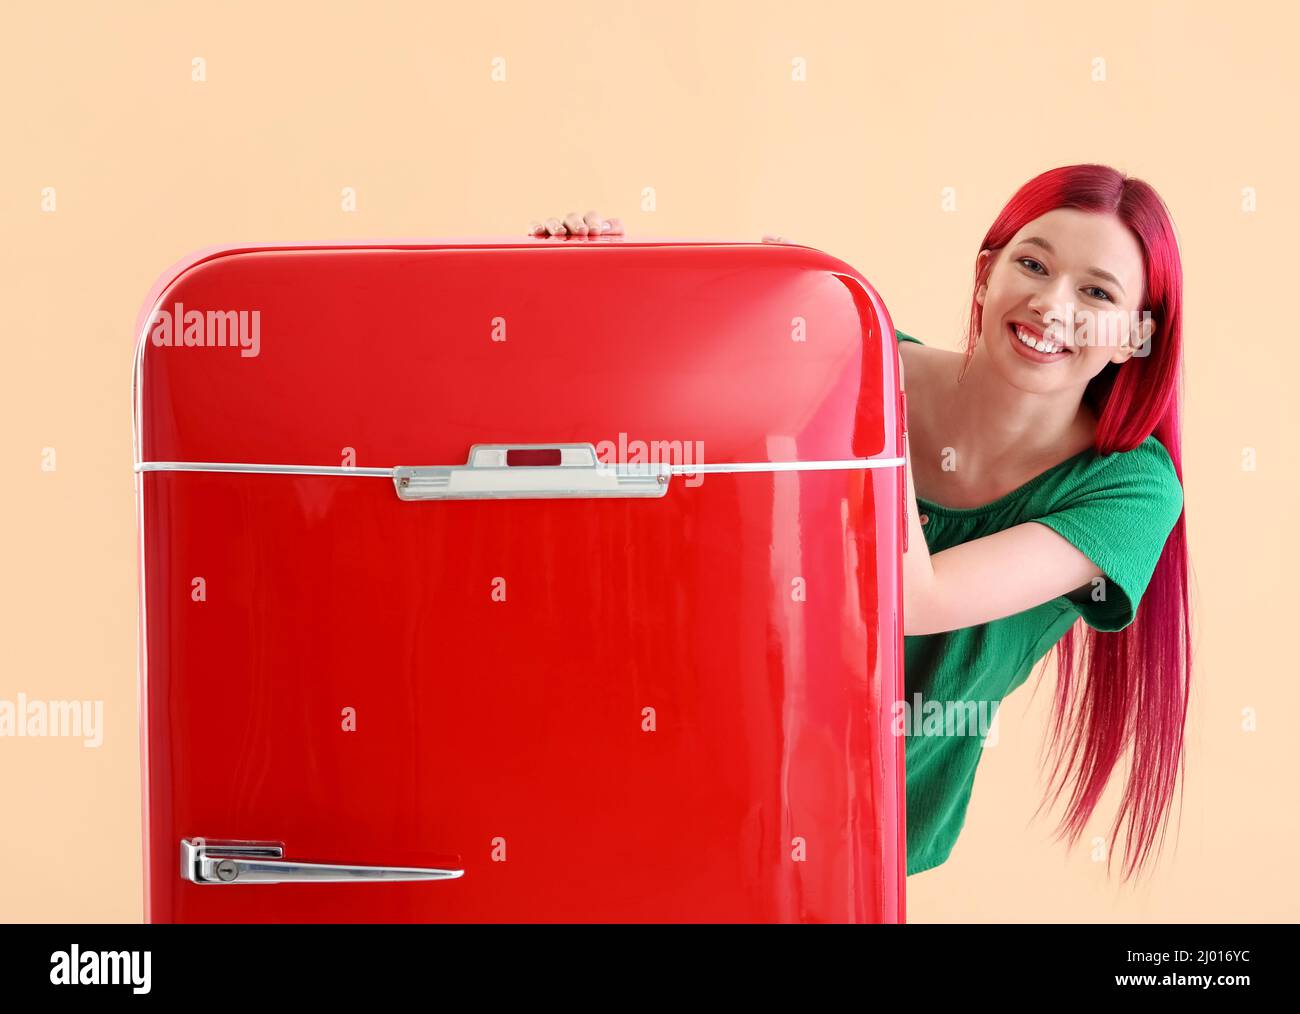 Beautiful young woman near red fridge on color background Stock Photo